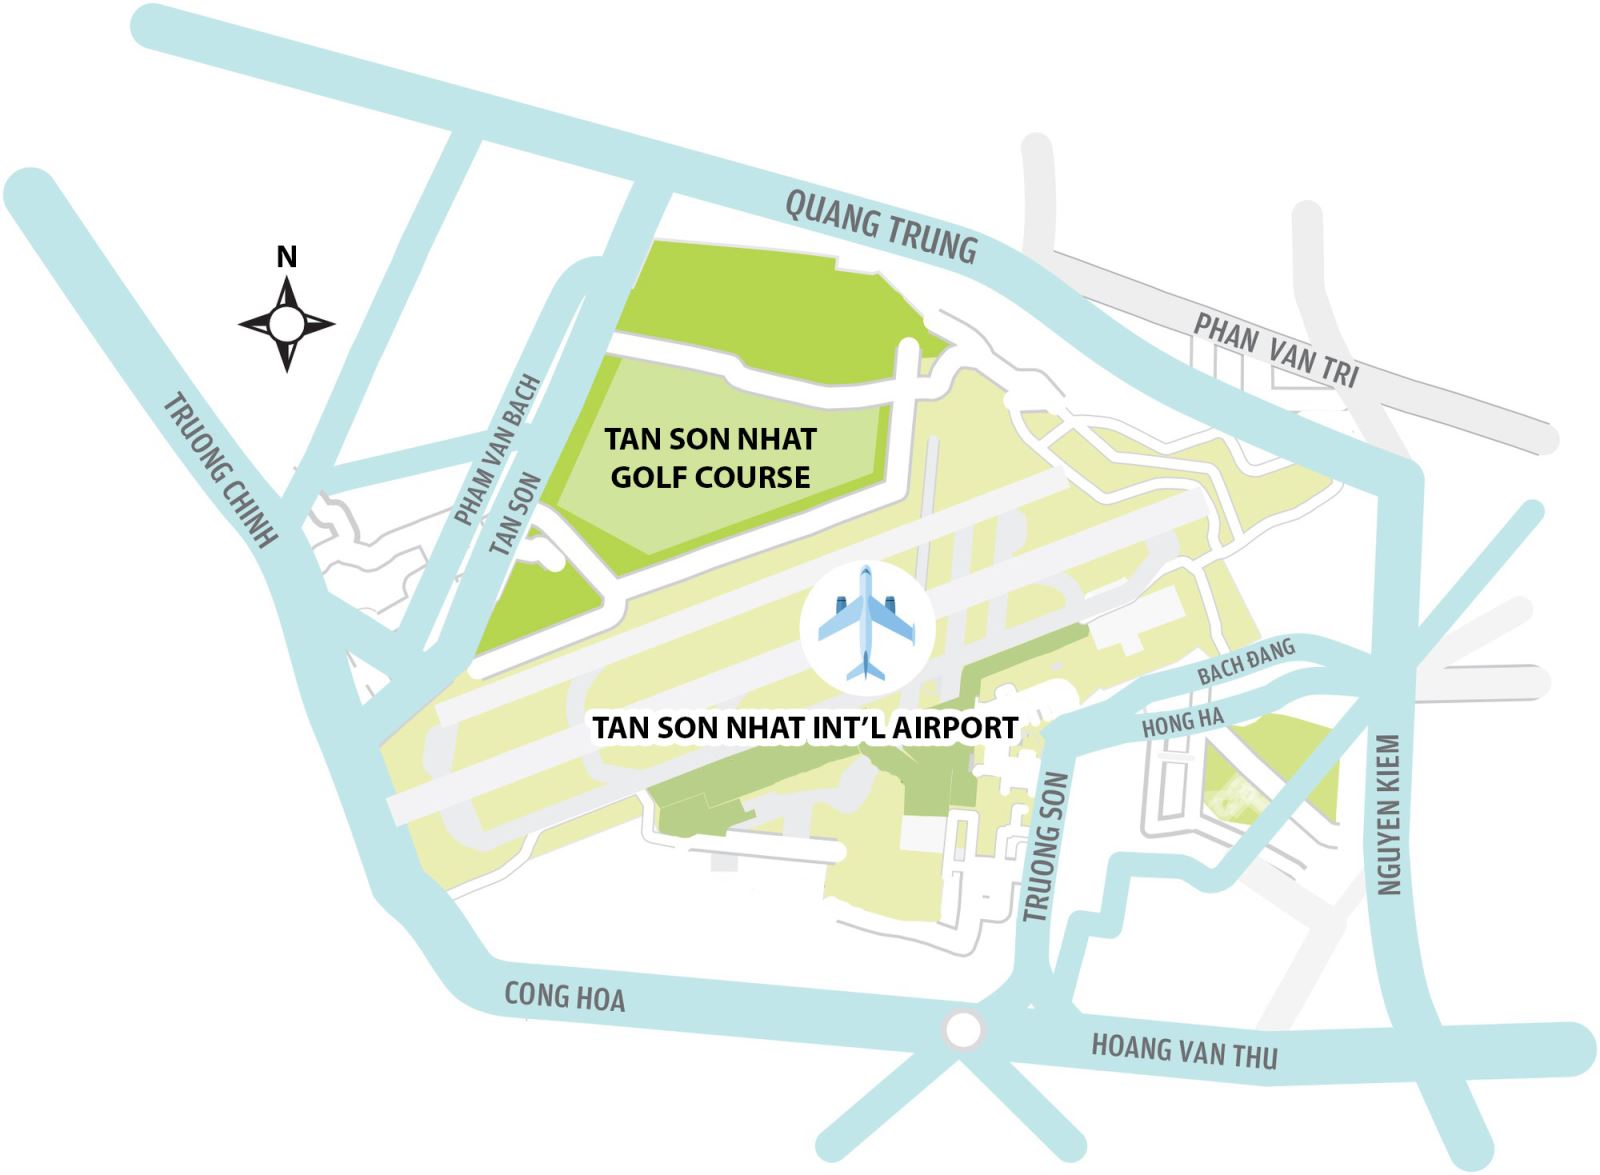 Debate over expansion options for overloaded Ho Chi Minh City airport